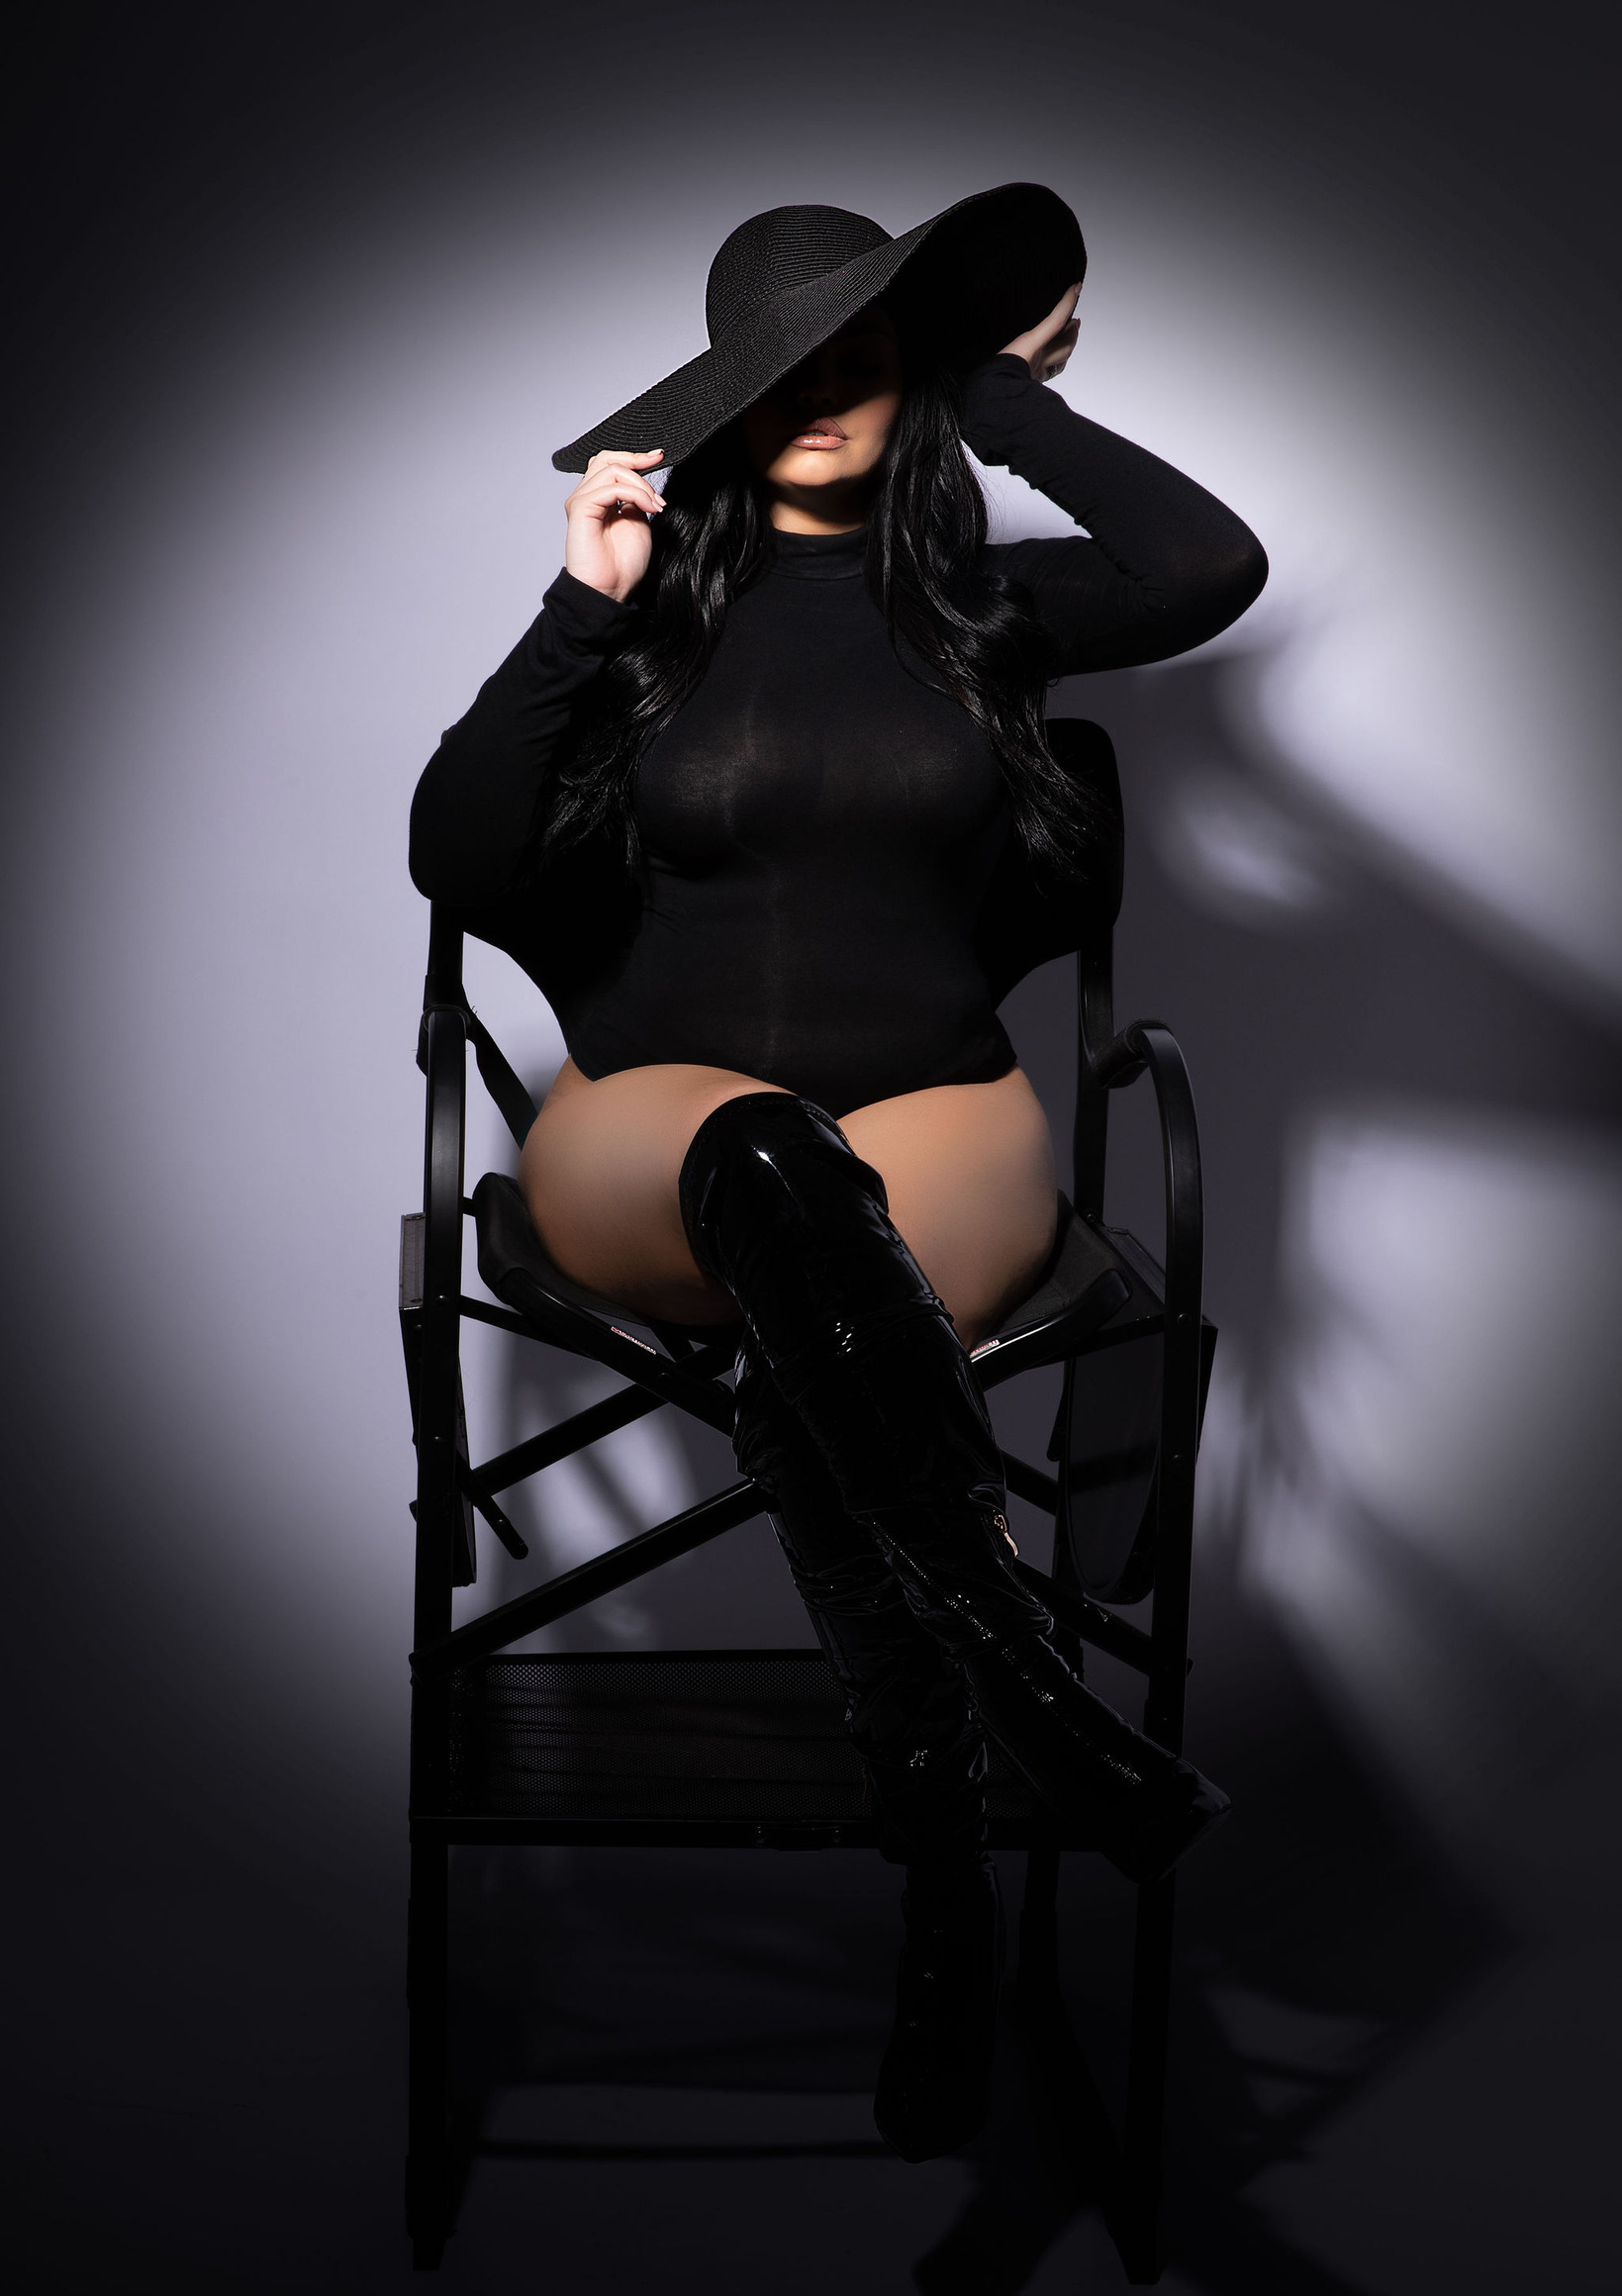 conservative boudoir photoshoot with a black long sleeve turtleneck bodysuit and a black hair covering face for a mysterious and elegant pose taken by Modesto luxury photographer aly incardona who shoots all things glamour